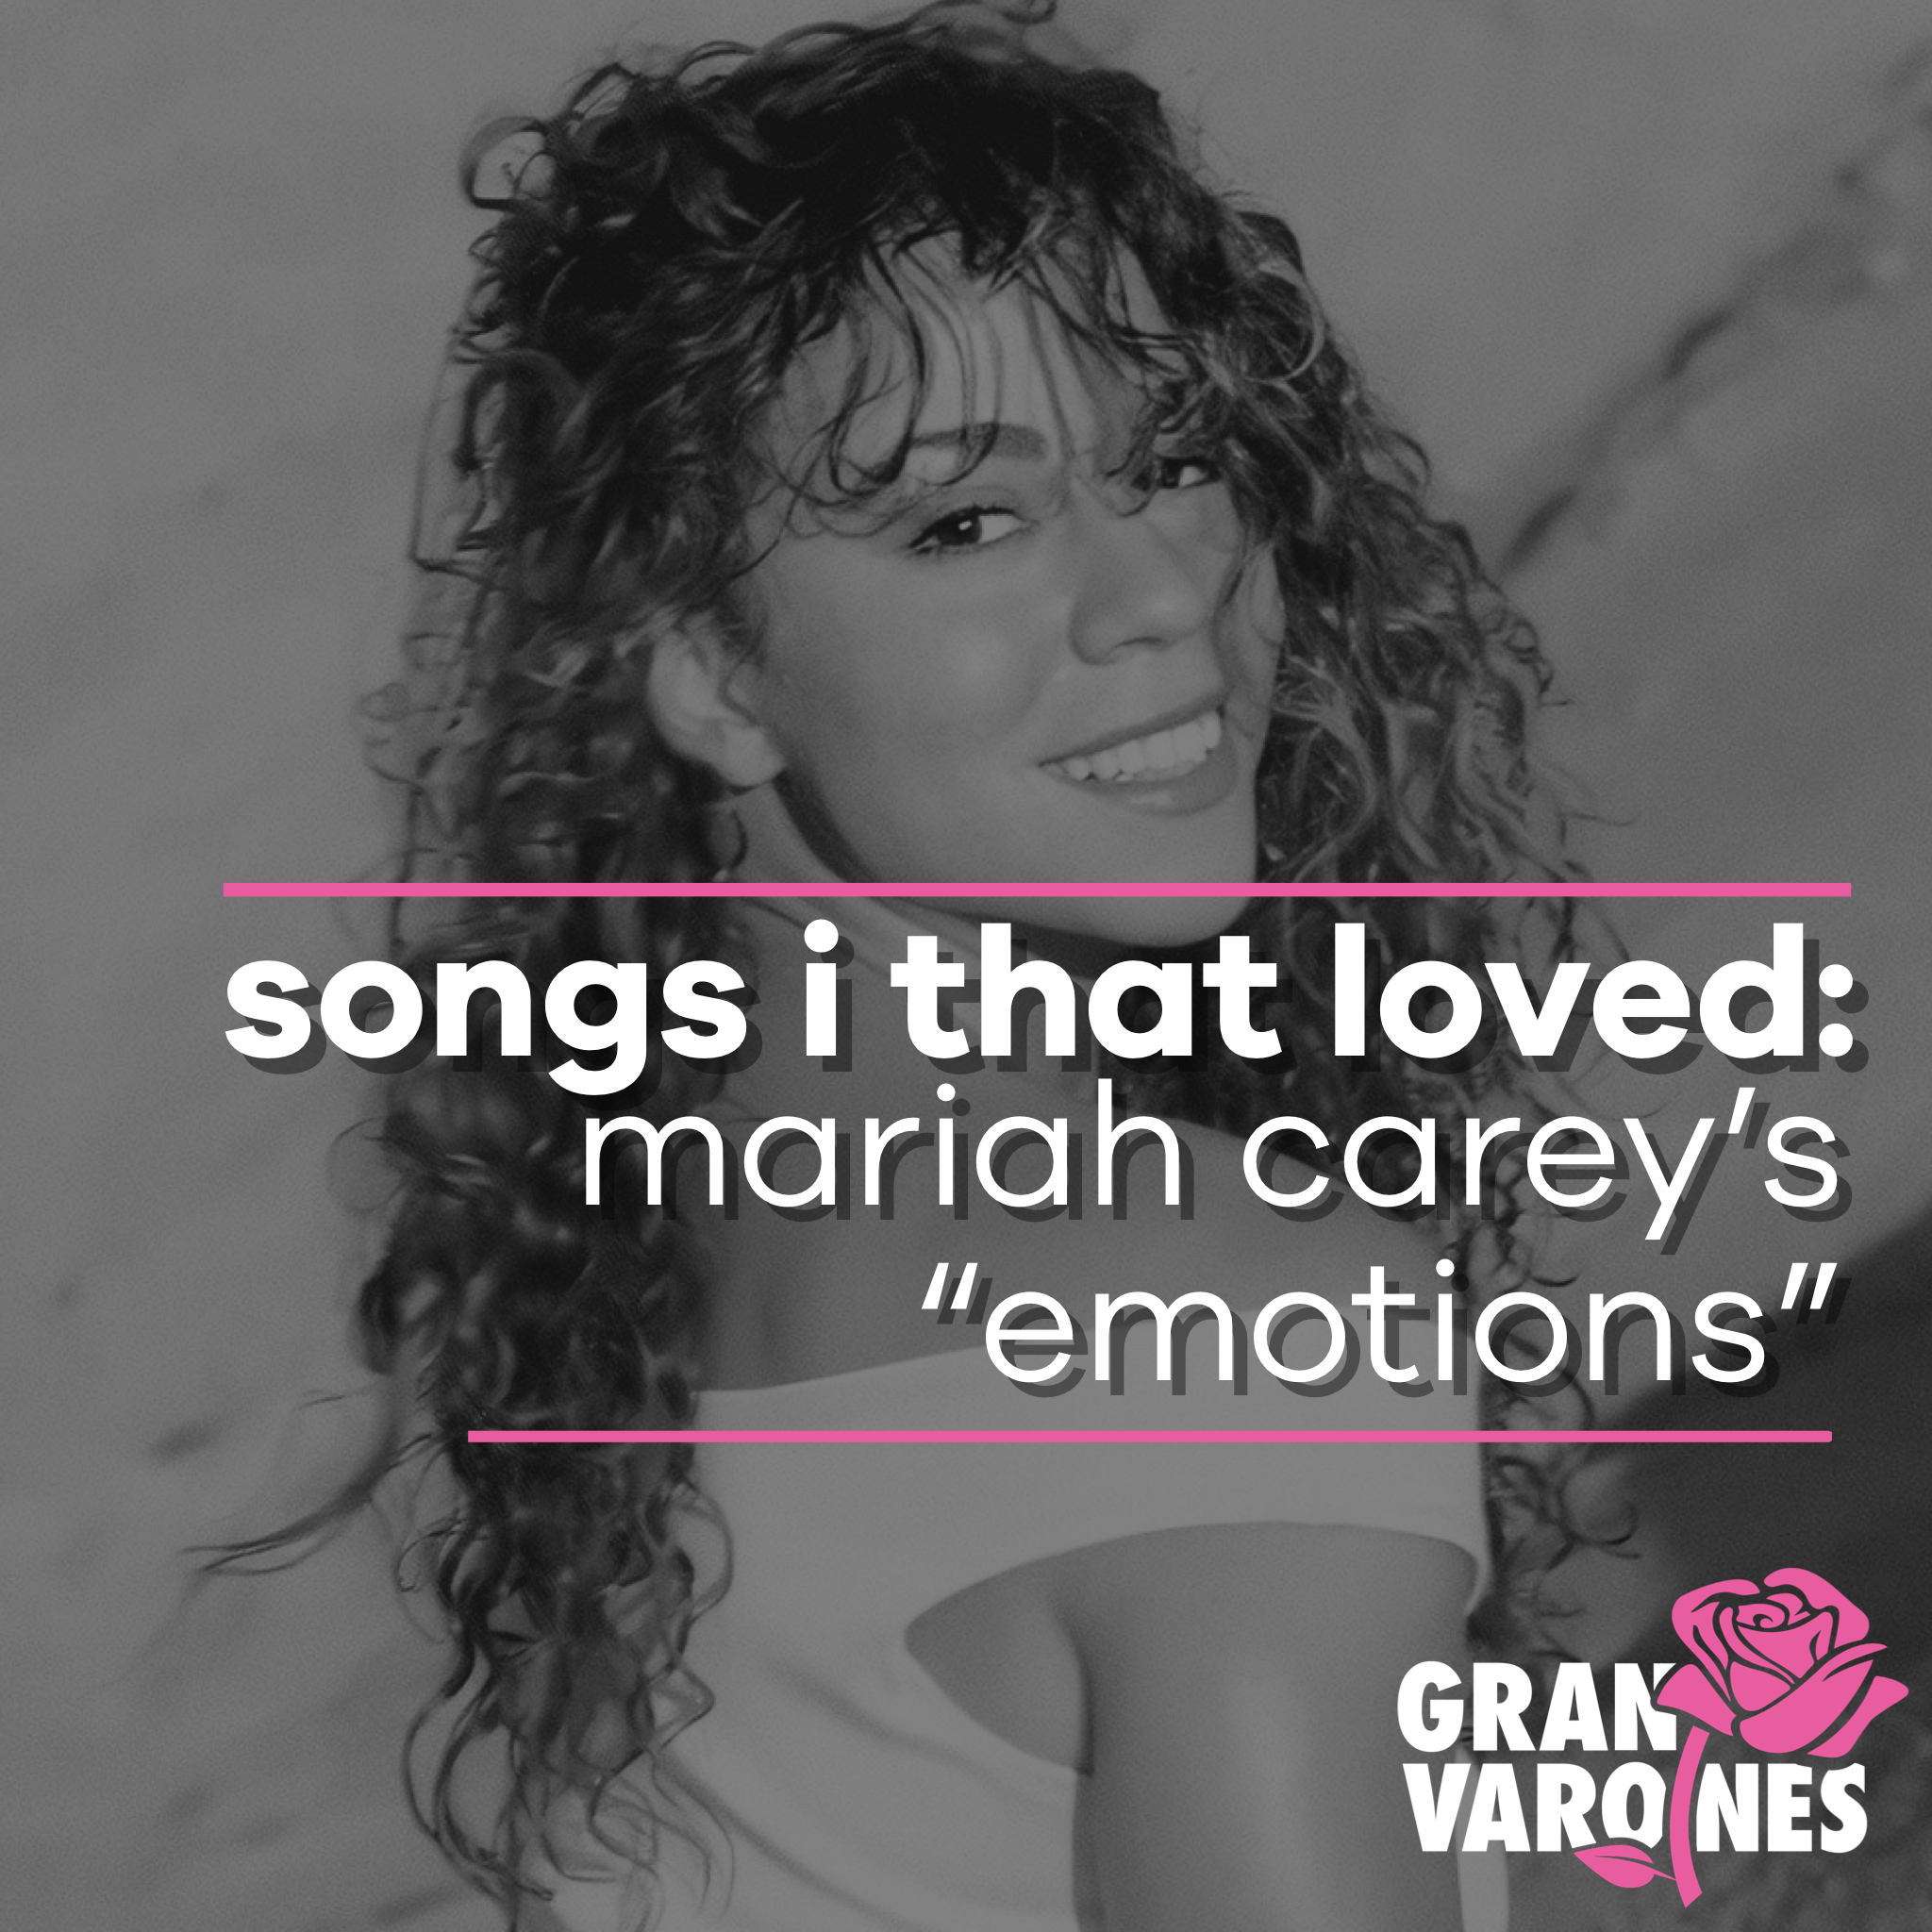 Songs That I Loved: Mariah Carey’s “Emotions”